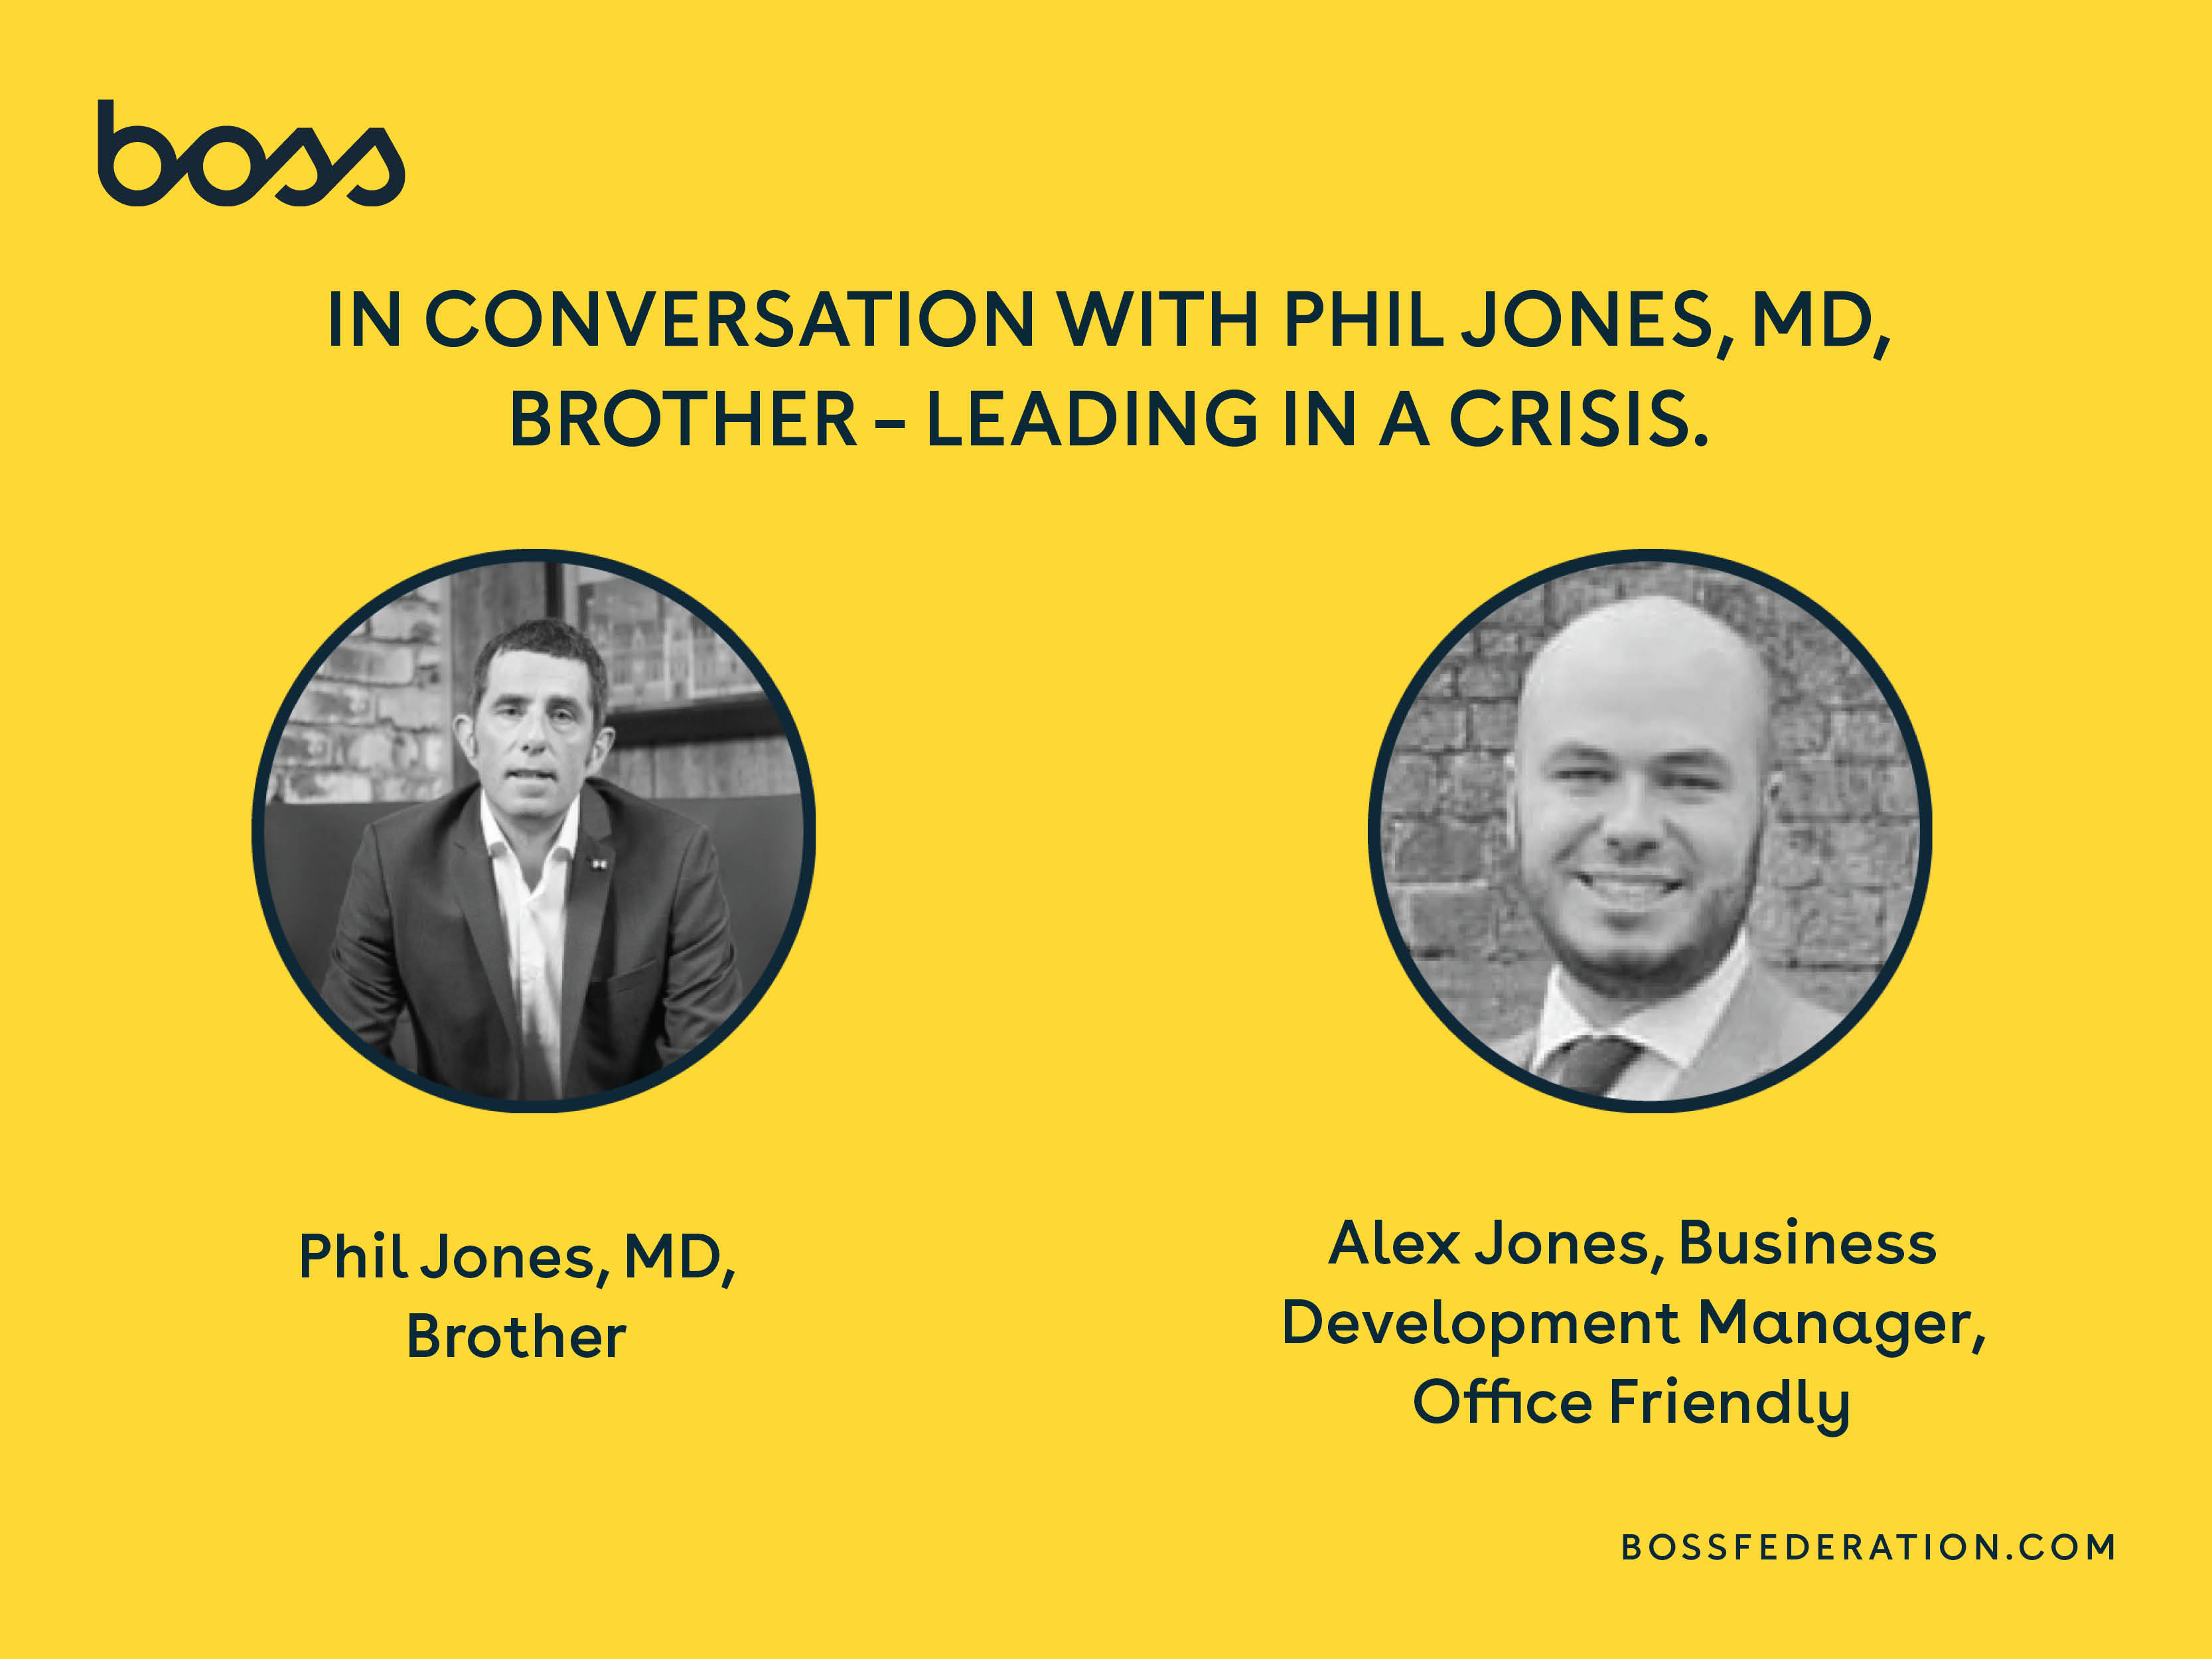 BOSS Leaders of the Future in conversation with Phil Jones, MD, Brother. Leading in a Crisis.